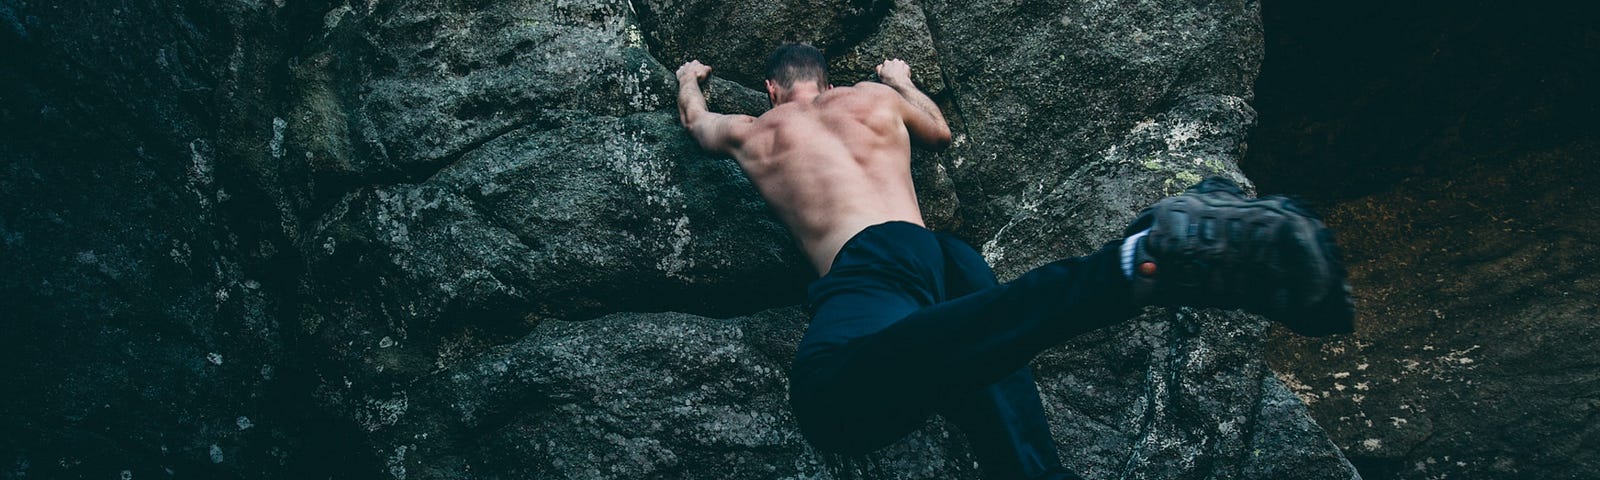 A topless muscular man in dark track-suit bottoms hangs from a rock with his bare hands, his back towards the camera.